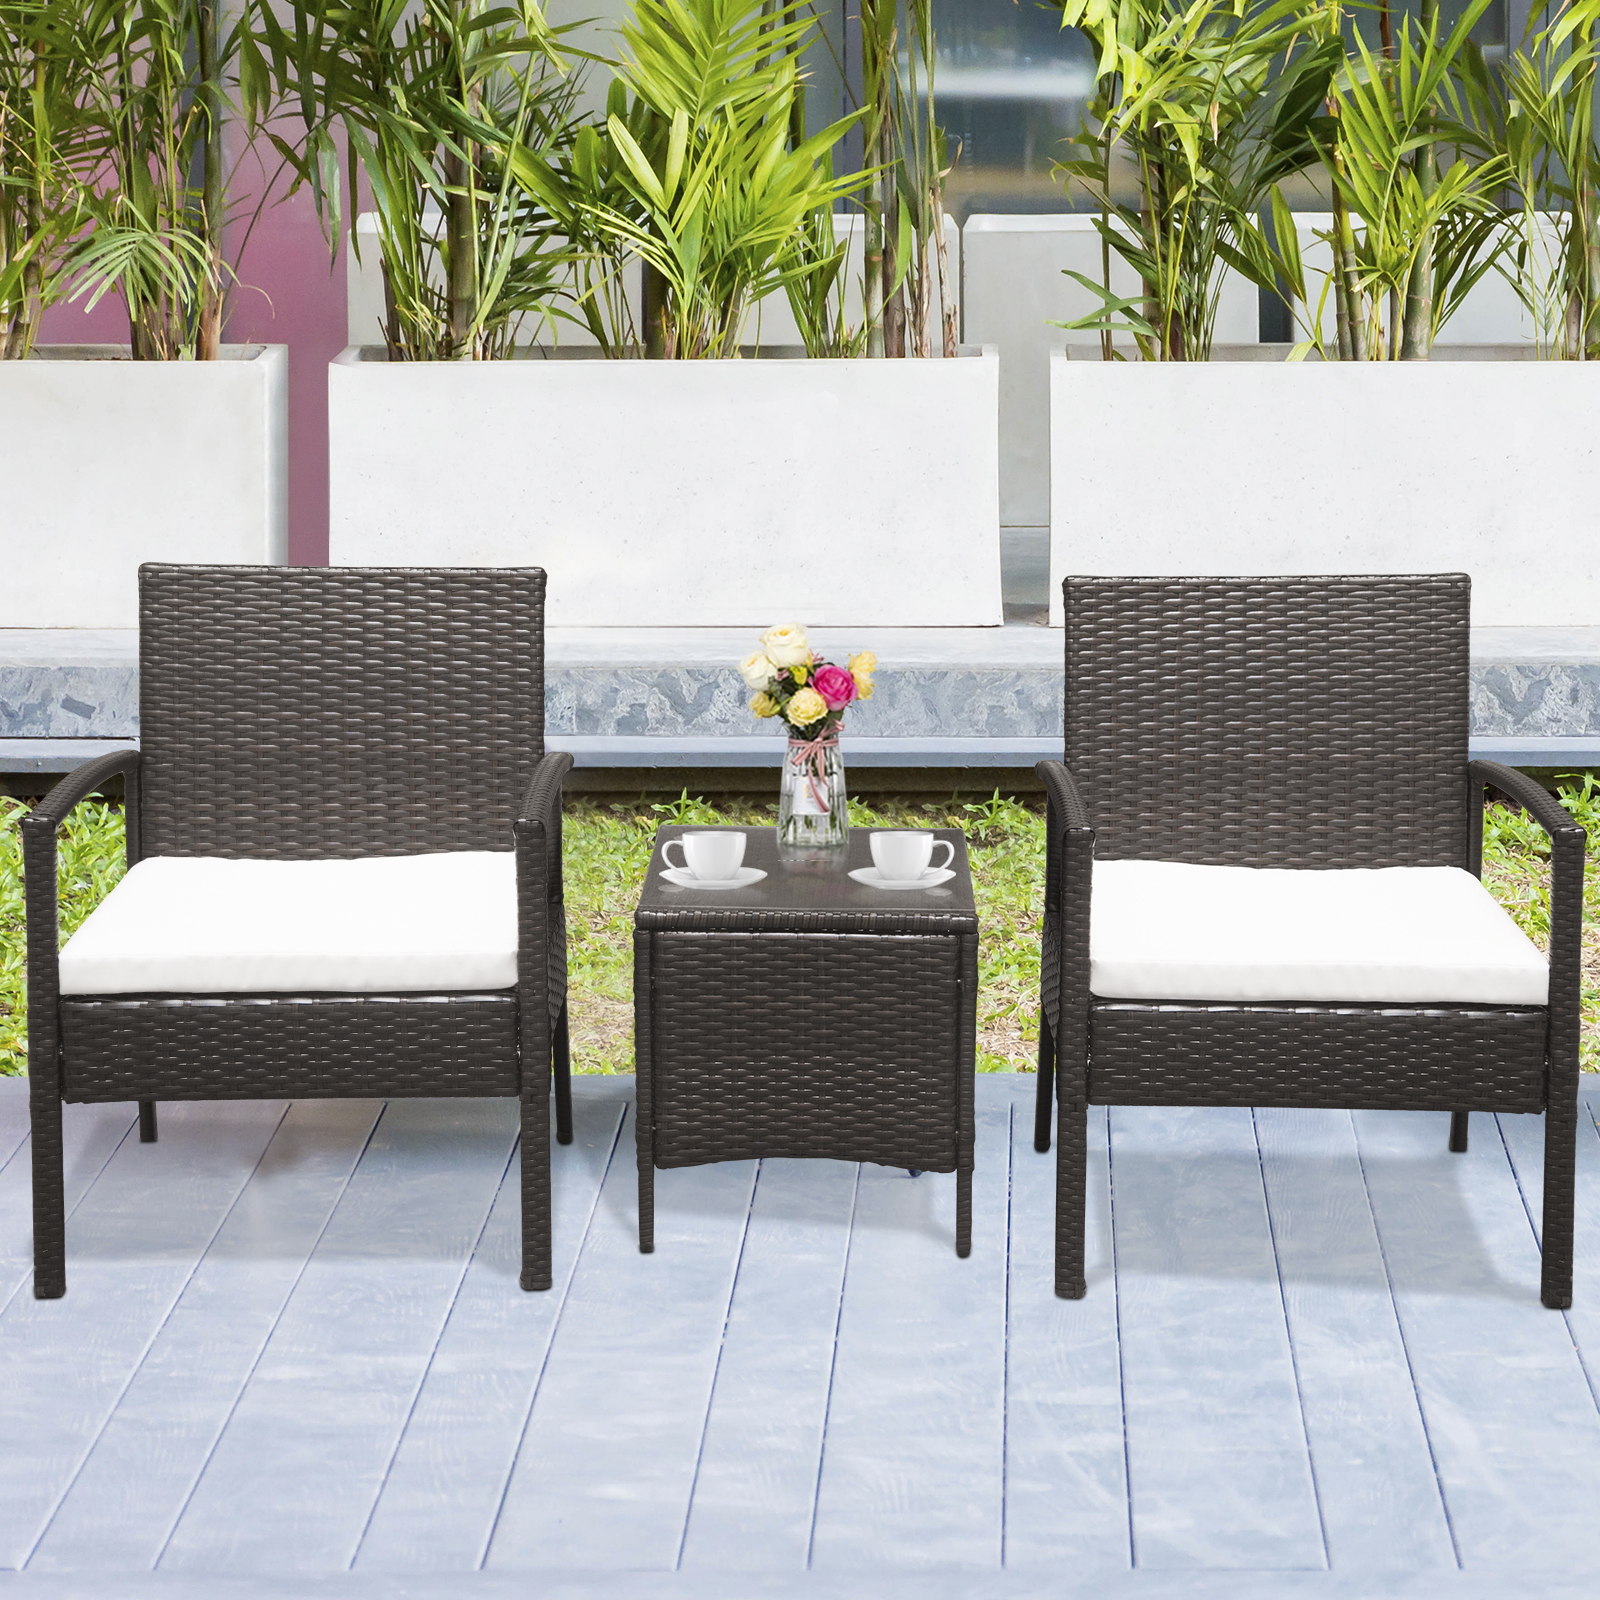 Ktaxon 3PCS Outdoor Patio Garden Wicker Rattan Conversation Chat Set, Rattan Furniture Set for Outdoor and Porch, Balcony, Poolside - image 2 of 7